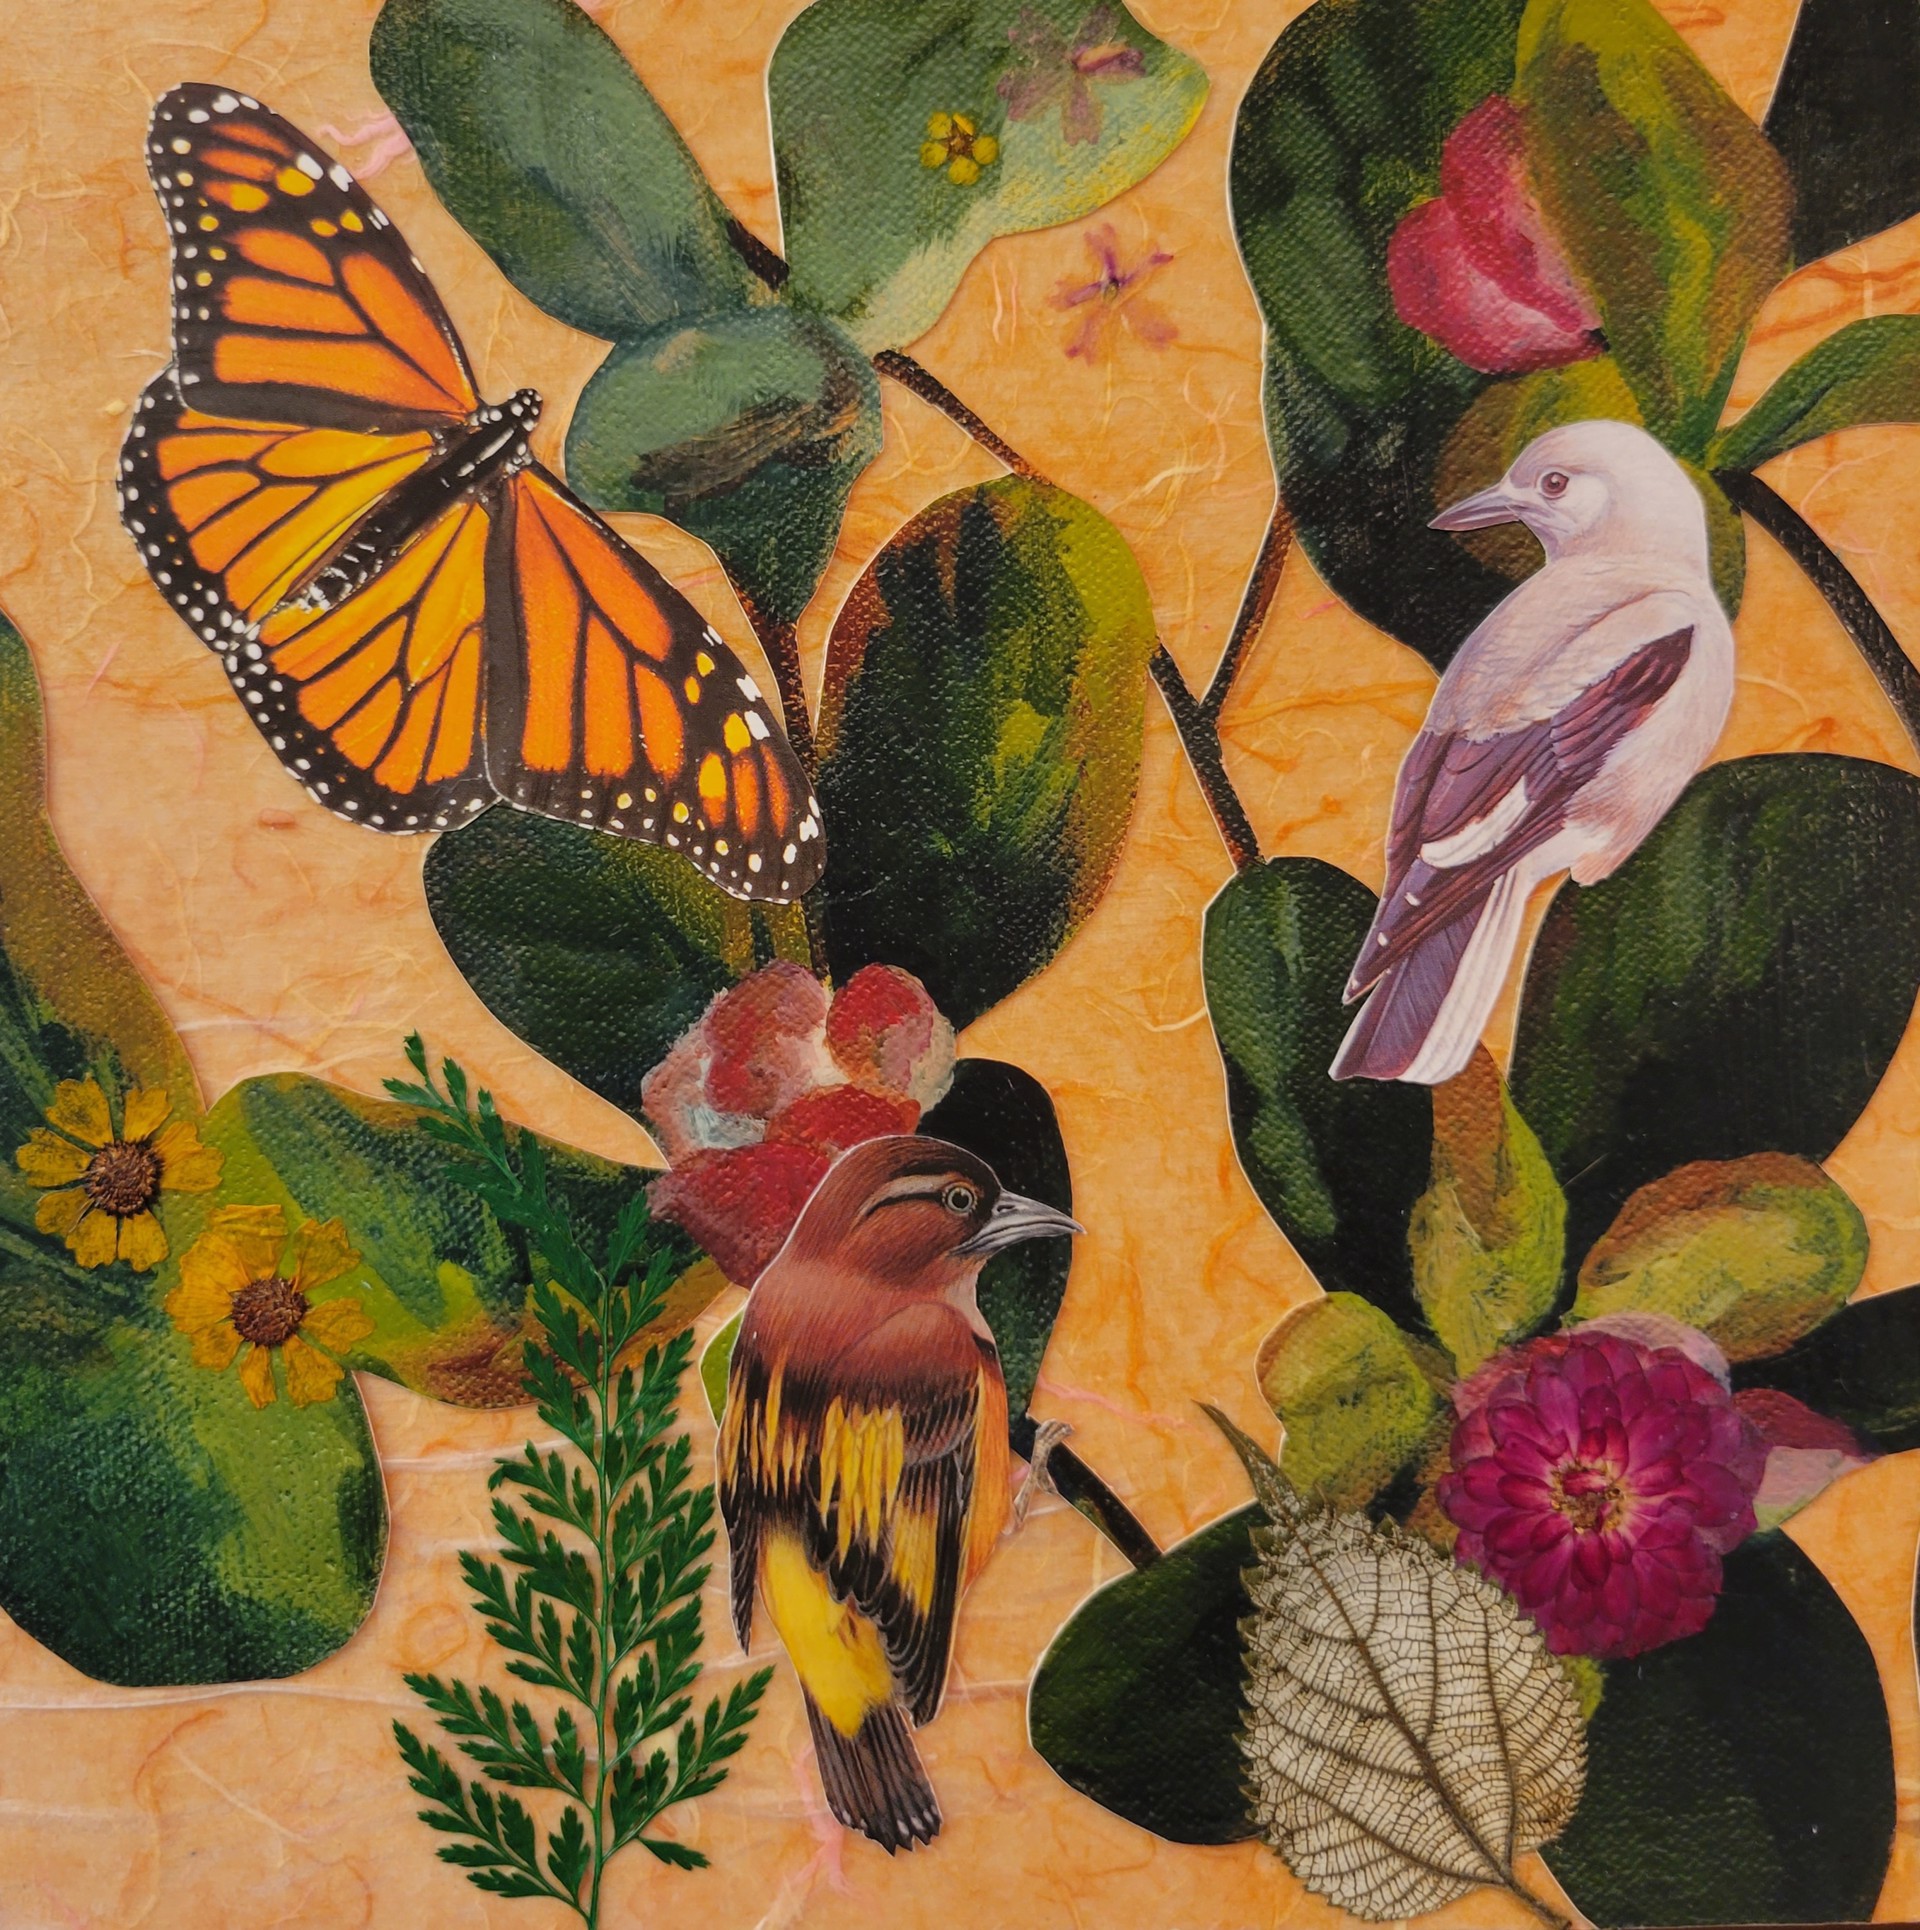 Ambiguity of Nature by Allison Bowman